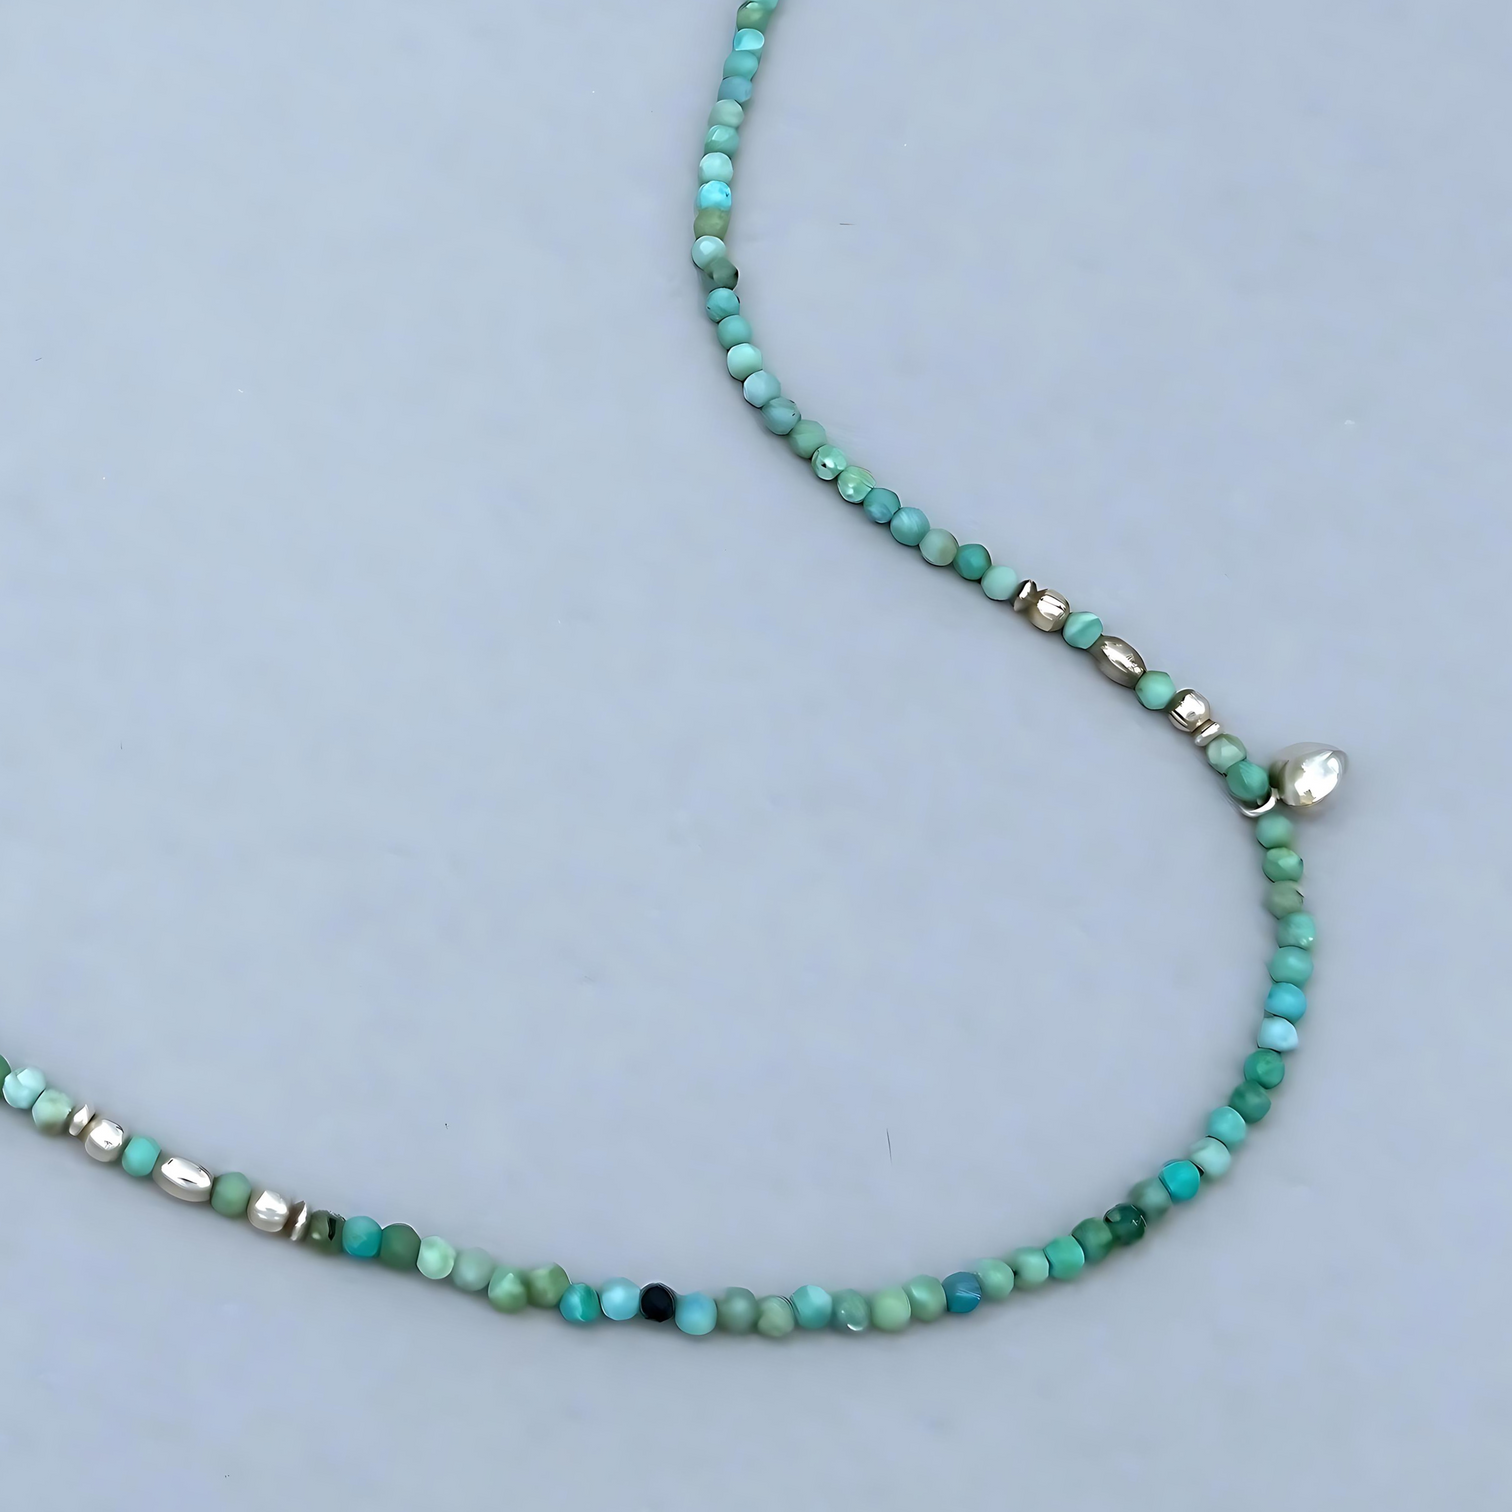 This Le BijouBijou Joy Necklace is pure joy. The soft-toned faceted Opals combined with Sapphires, the two small charms and Sterling Silver Elements set this Necklace apart. 